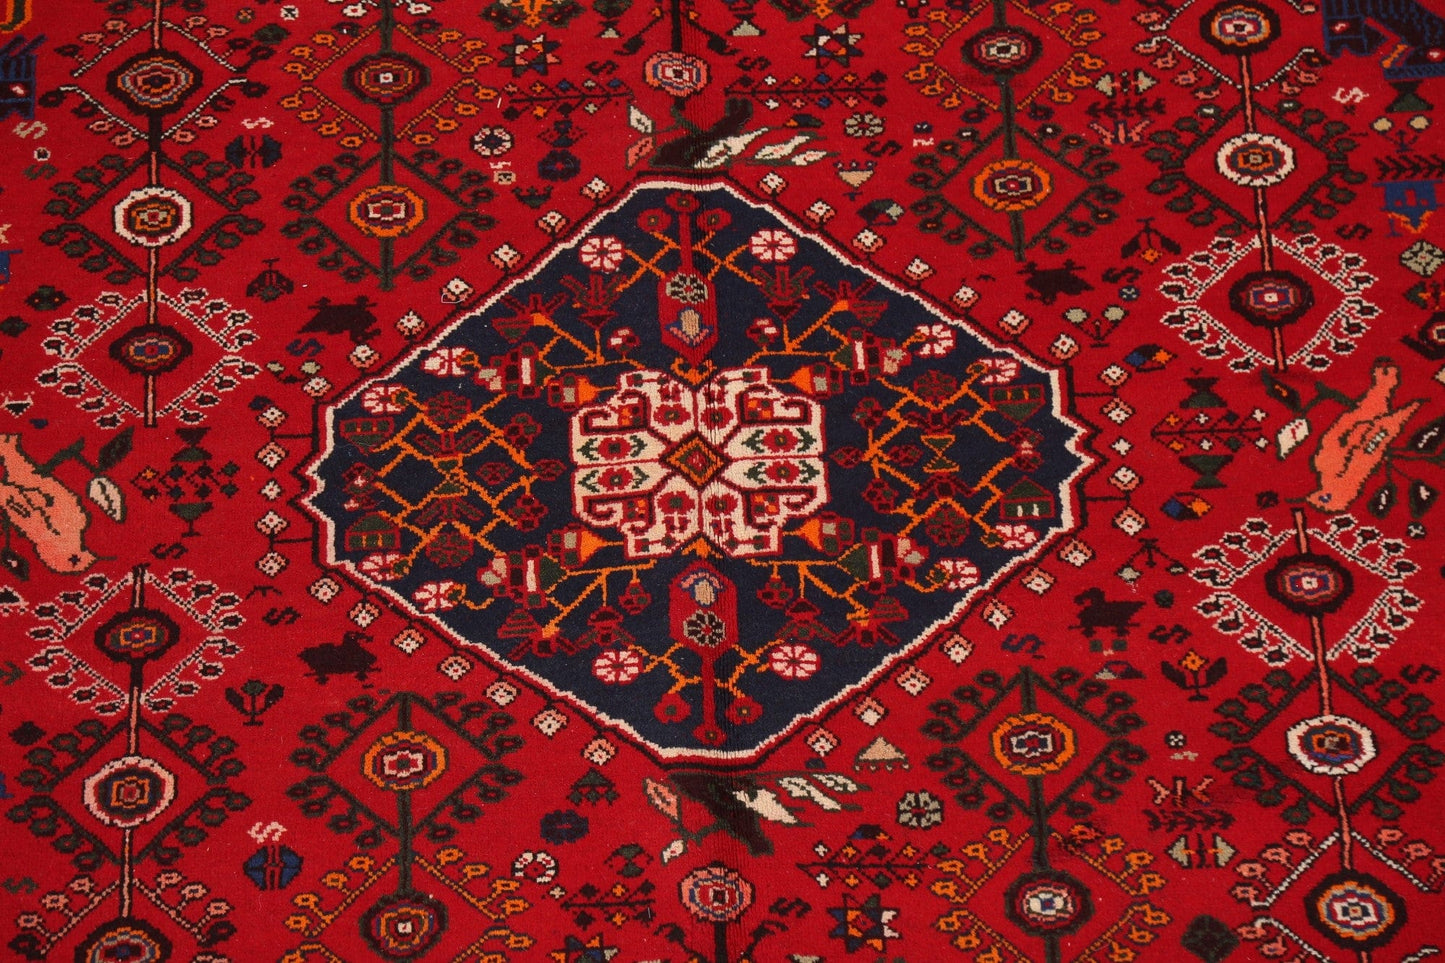 Tribal Wool Red Abadeh Persian Area Rug 7x10